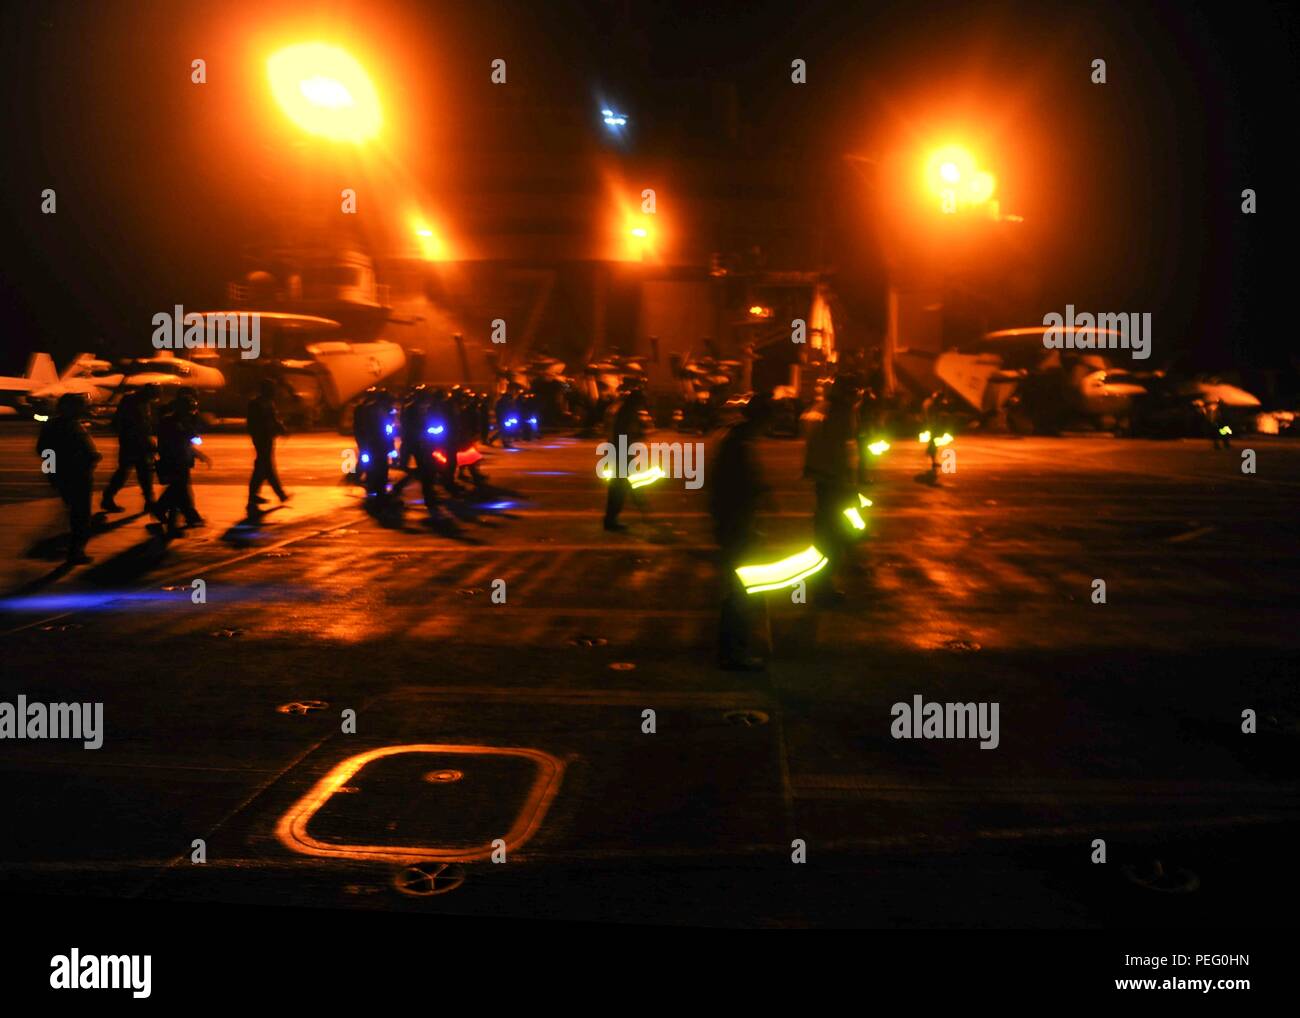 150812-N-ZZ999-060 ARABIAN GULF (Aug. 12, 2015) - Sailors and Marines participate in a foreign object debris  walkdown on the flight deck aboard the aircraft carrier USS Theodore Roosevelt (CVN 71). Theodore Roosevelt is deployed in the U.S. 5th Fleet area of operations supporting Operation Inherent Resolve, strike operations in Iraq and Syria as directed, maritime security operations and theater security cooperation efforts in the region. (U.S. Navy photo by Electrician's Mate 3rd Class Armand Lefebvre/ Released) Stock Photo